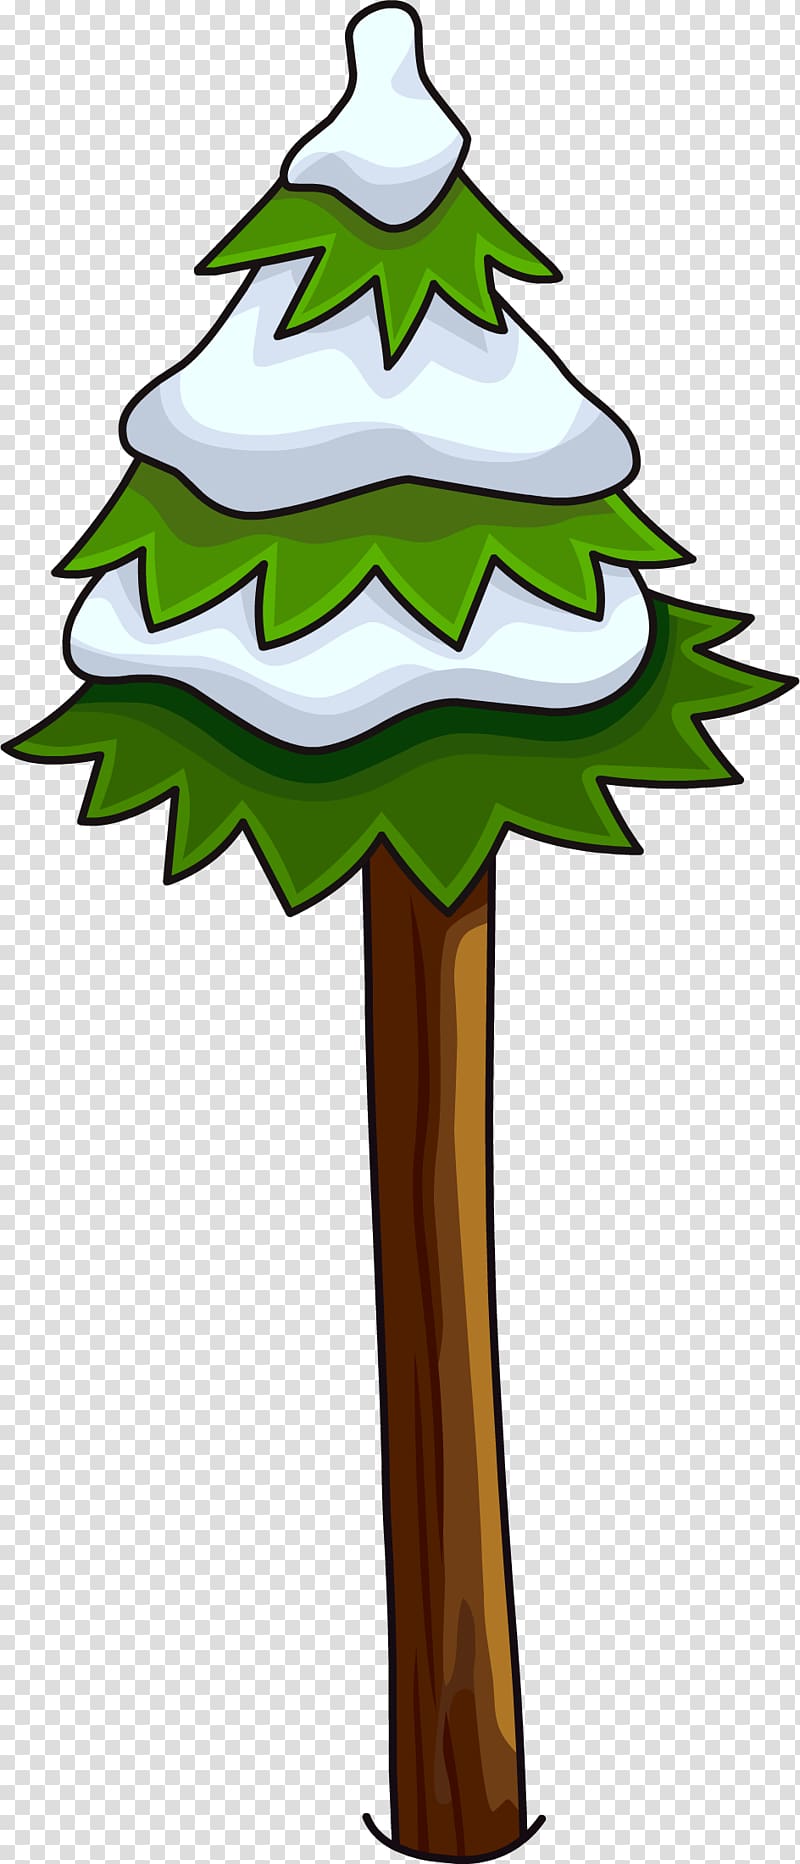 Tree Club Penguin Pine Igloo, coconut tree transparent background PNG clipart